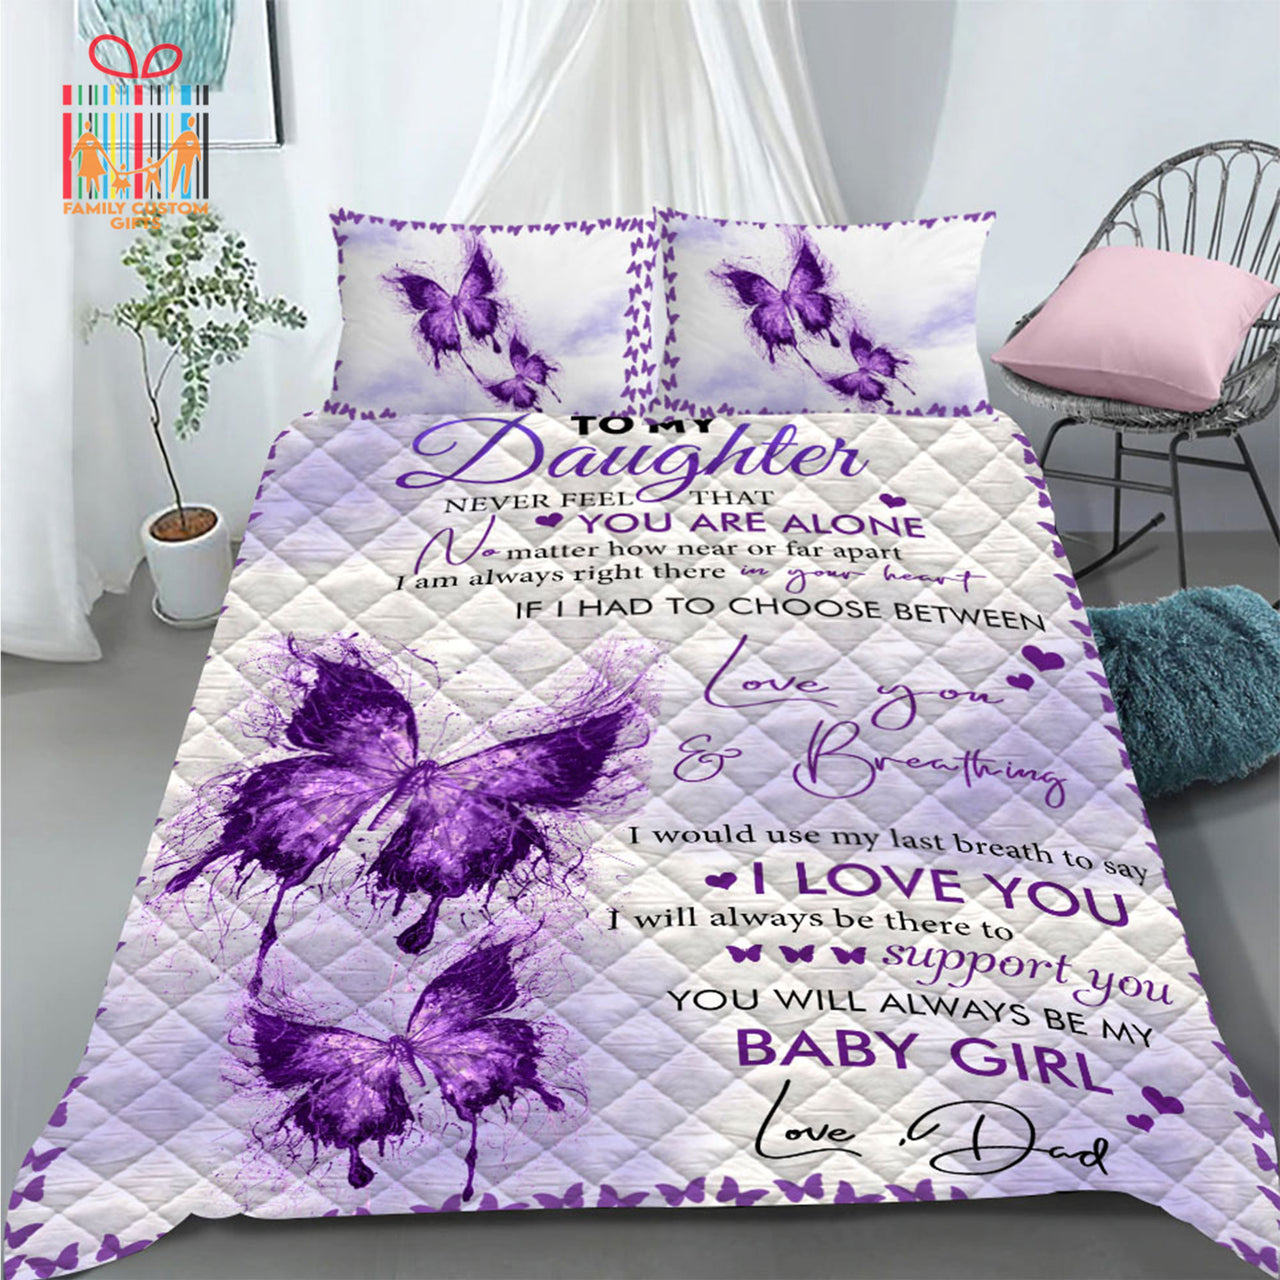 Comforter To My Daughter from Dad Custom Bedding Set for Kids Teens Adult Personalized Premium Bed Set